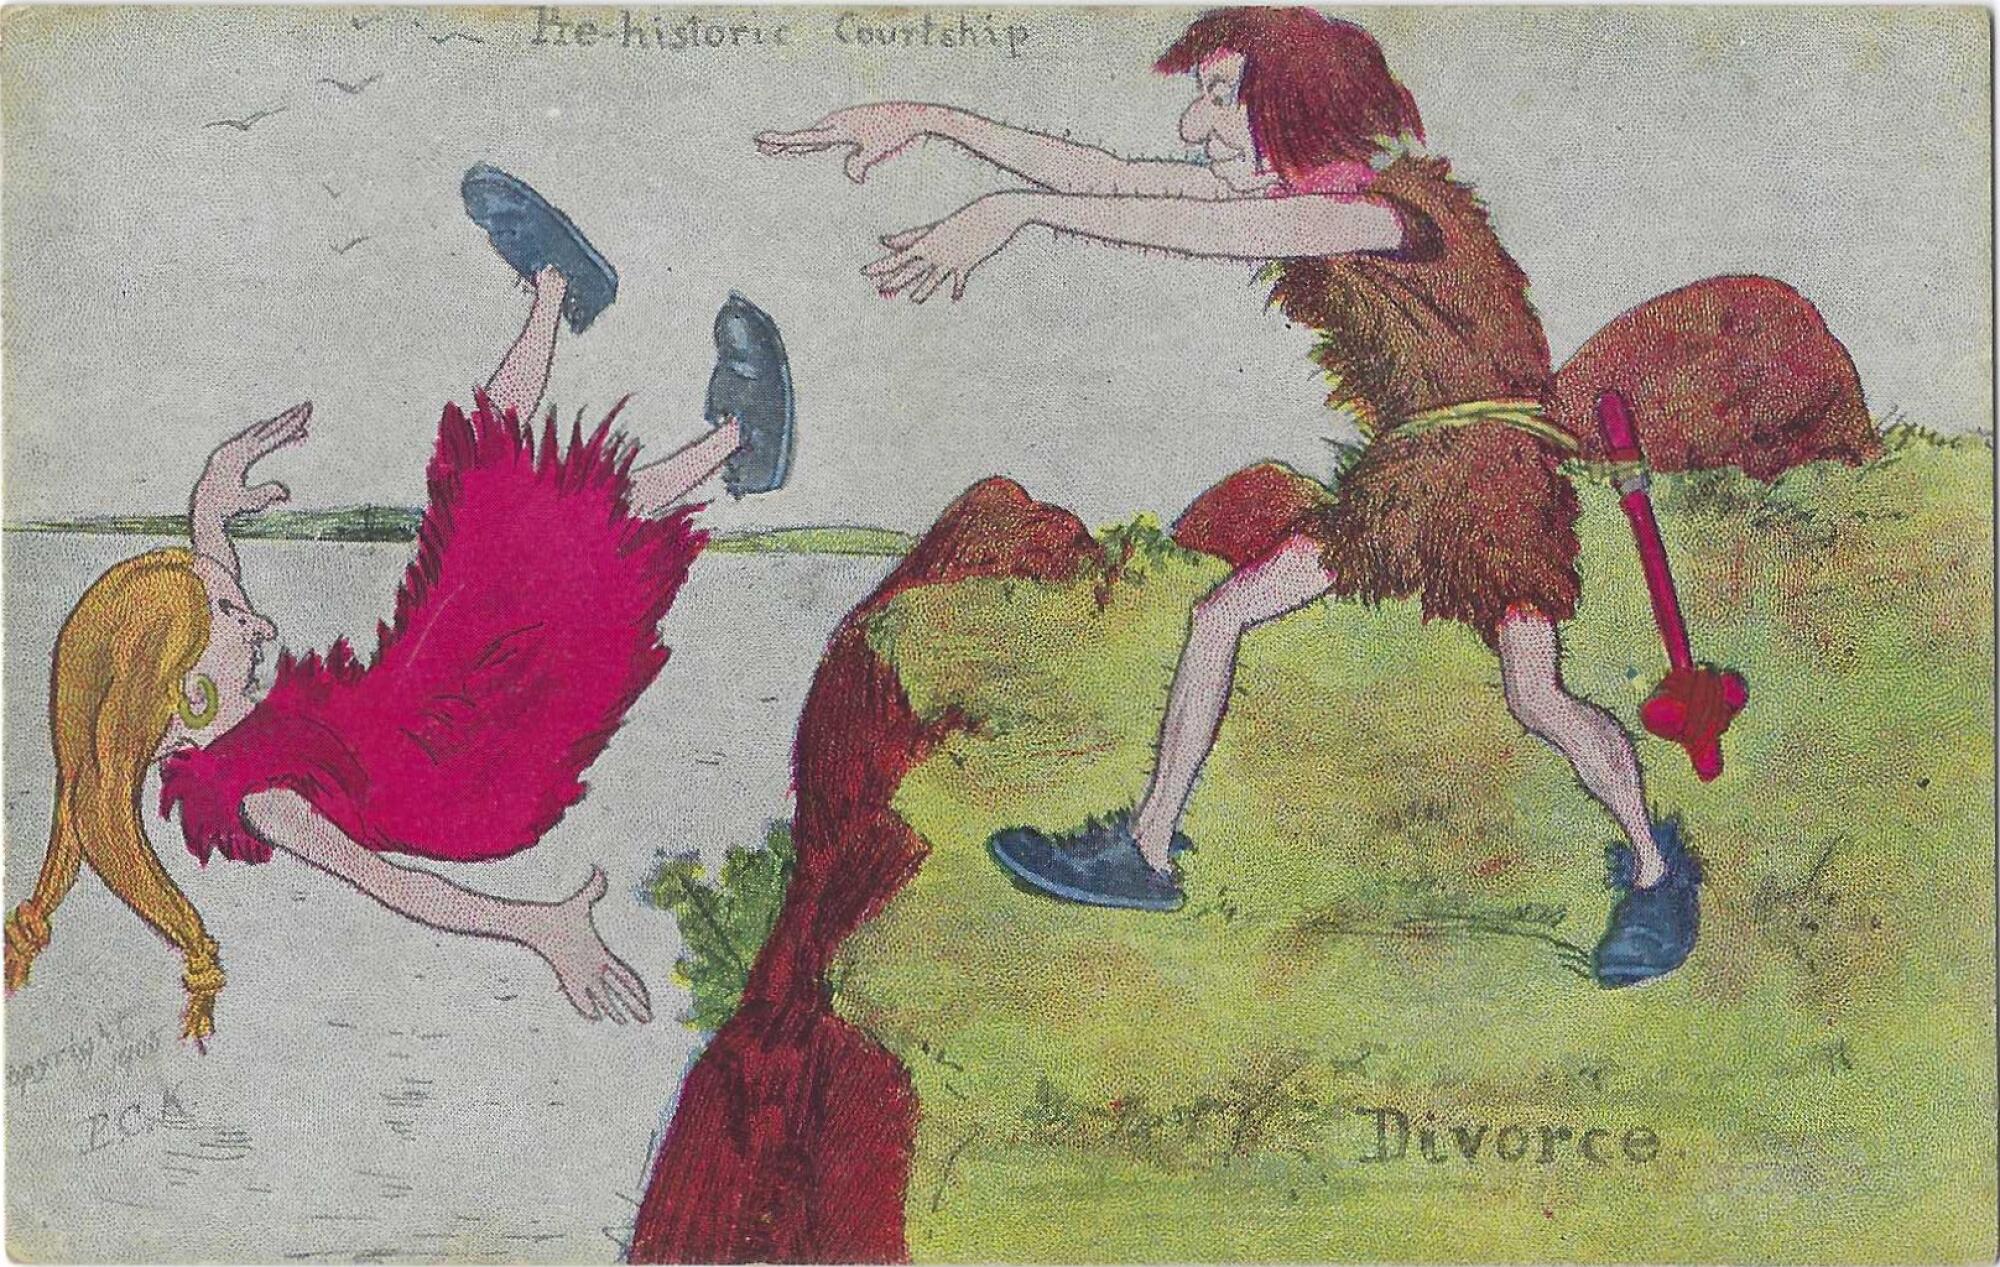 Vintage postcard depicts a caveman pushing a woman off a cliff. Text: "Pre-historic courtship: Divorce."